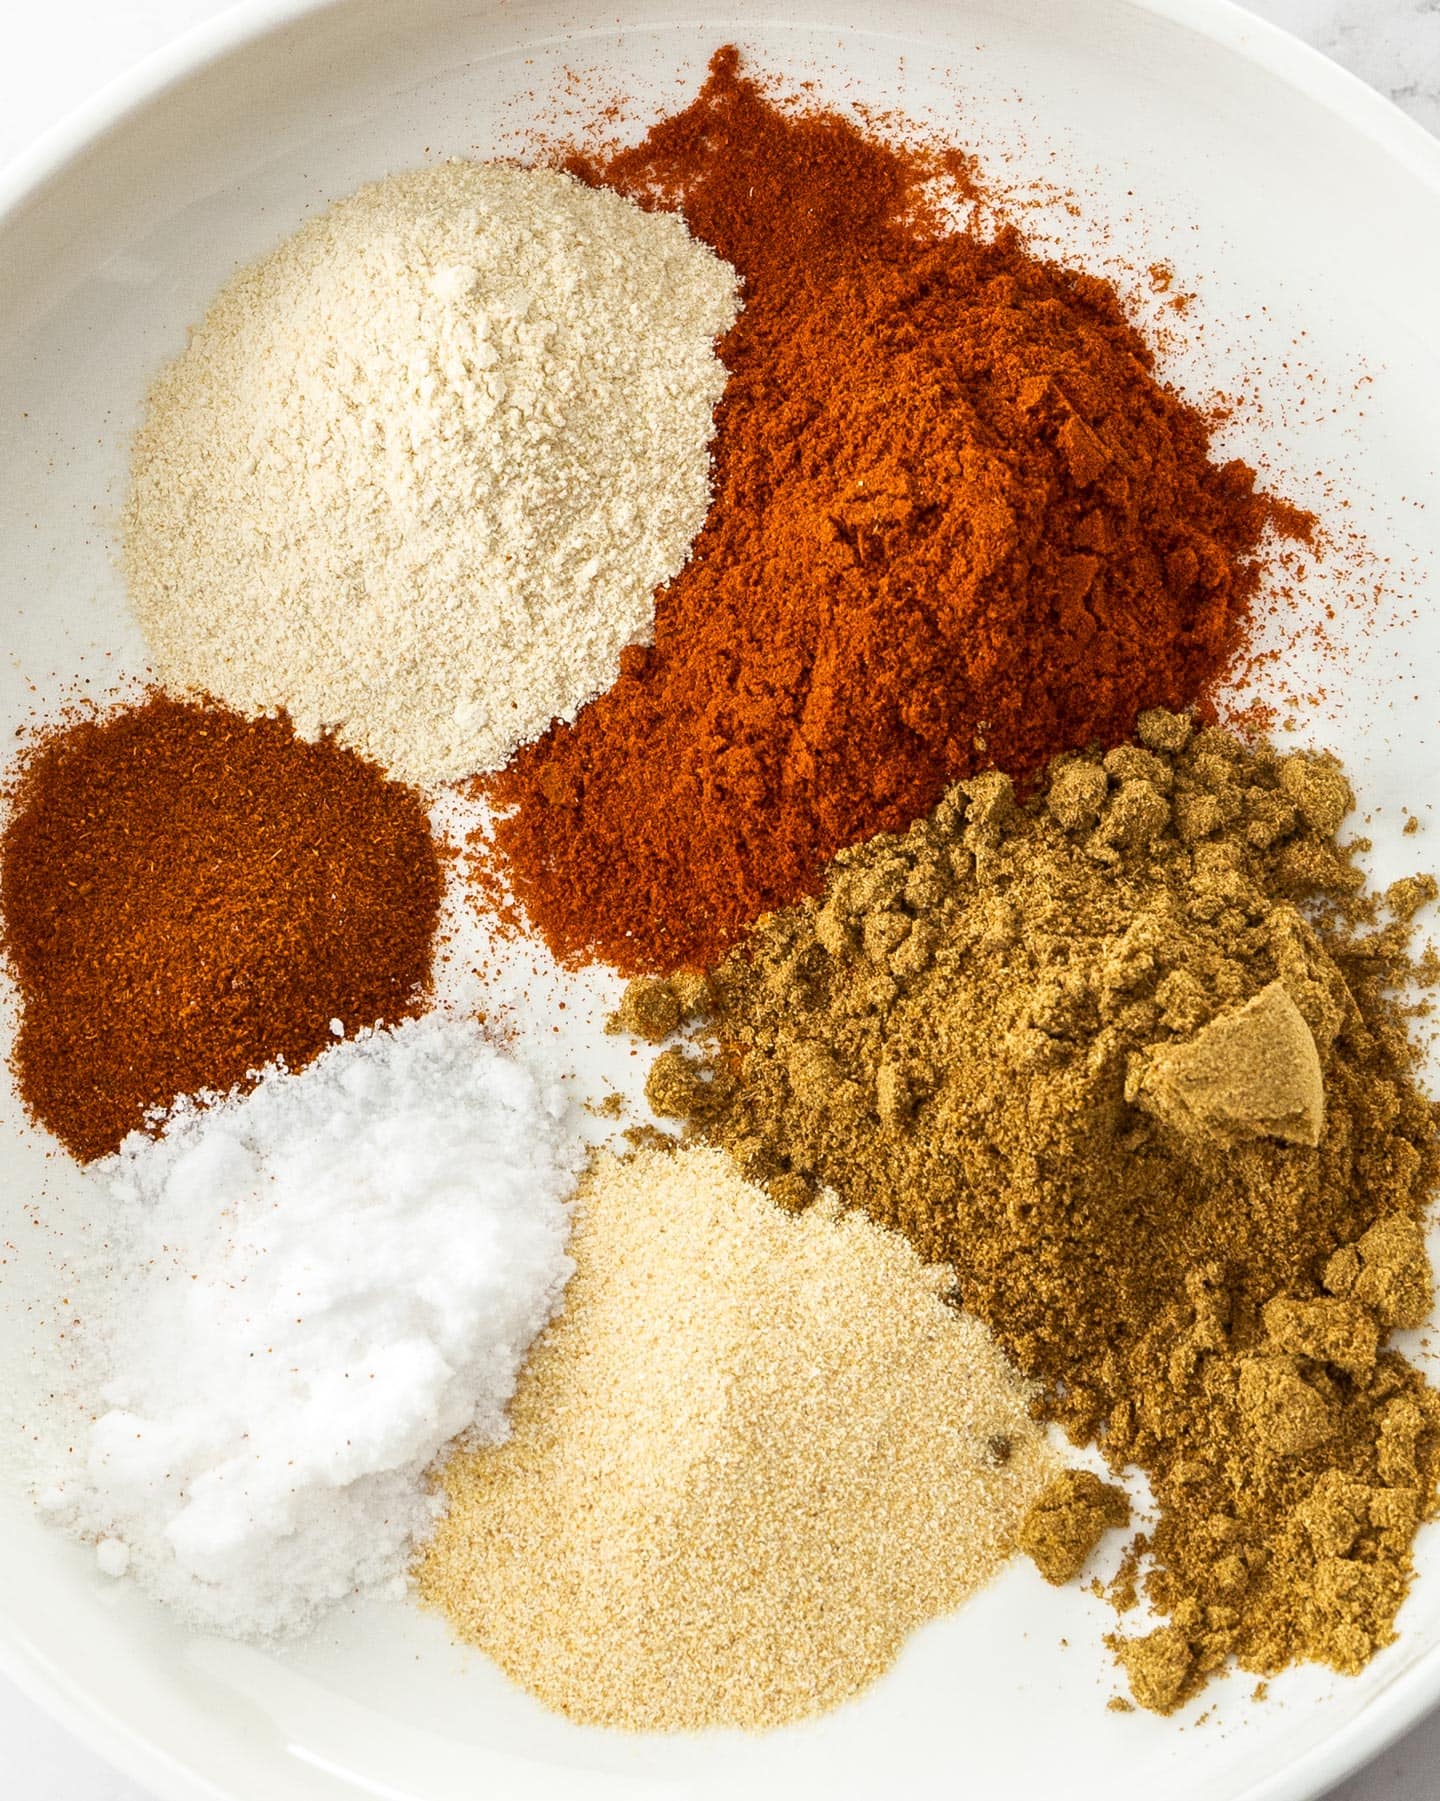 Different spices in piles on a plate.